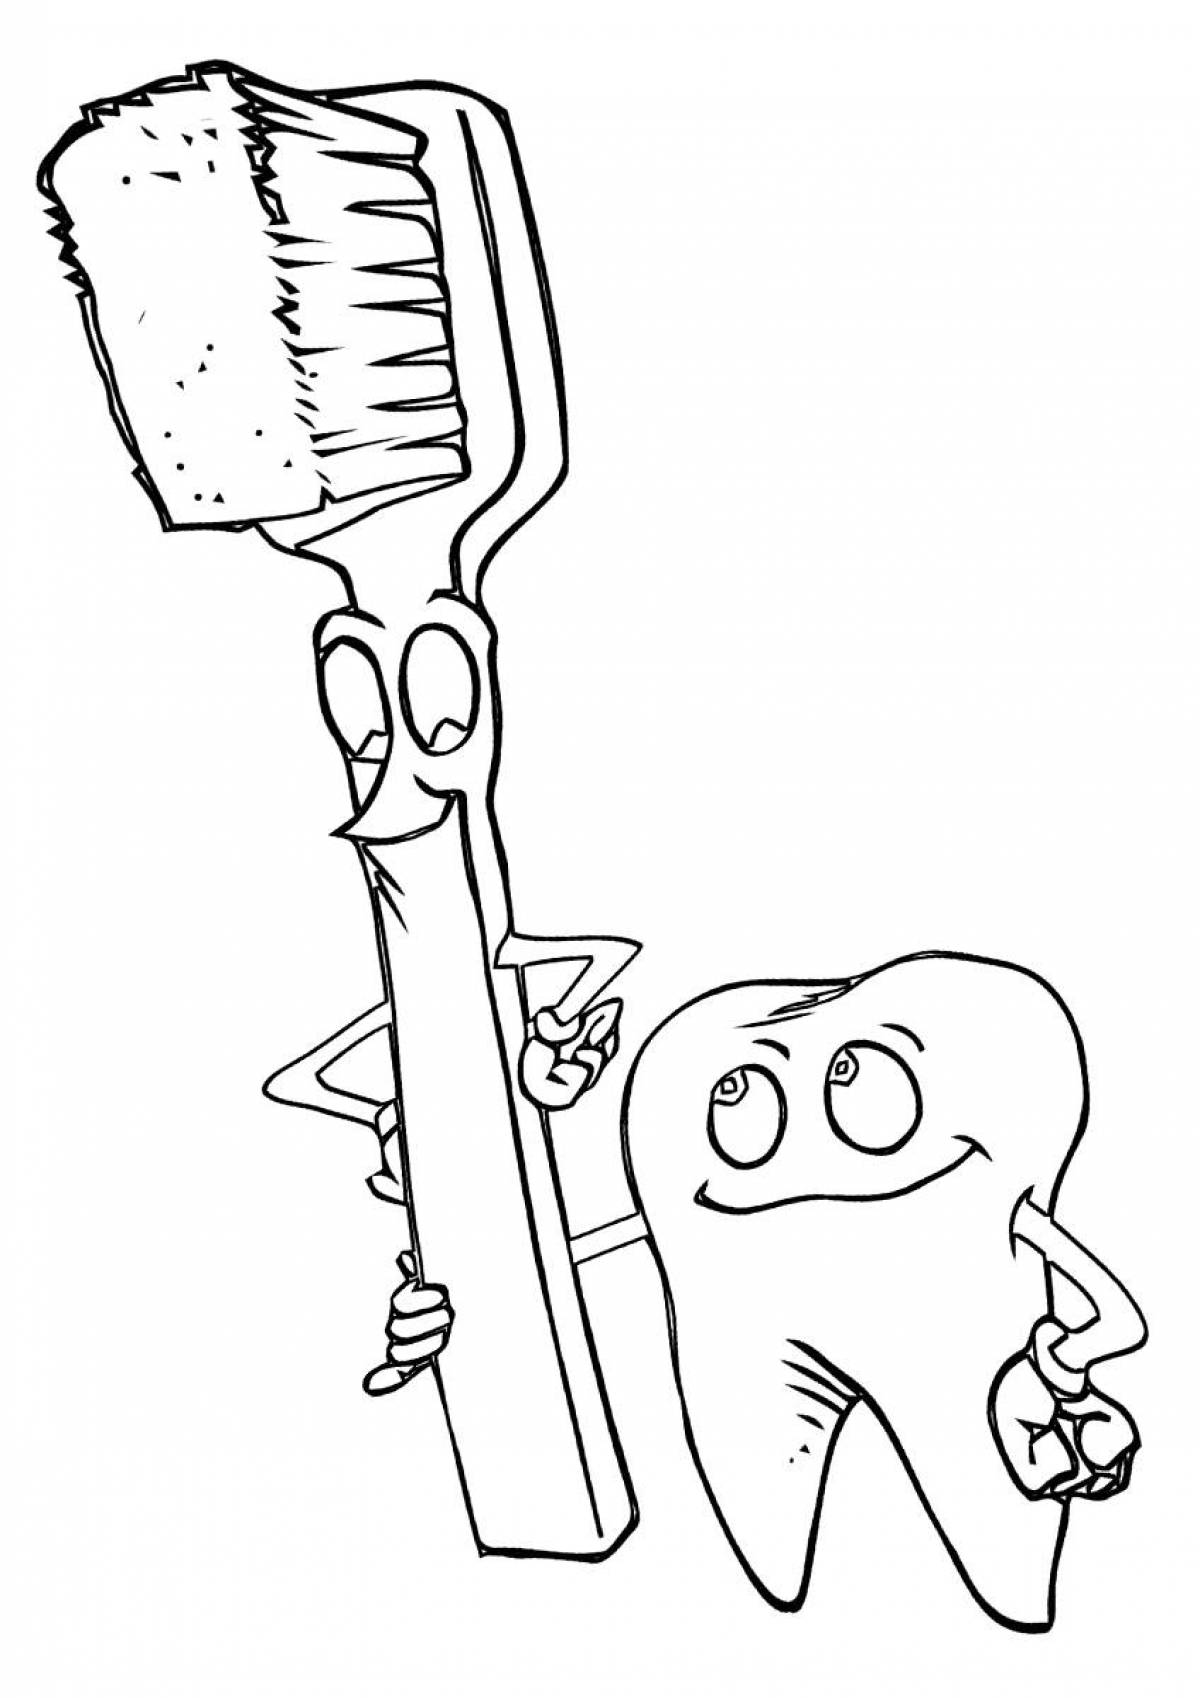 Brush and tooth